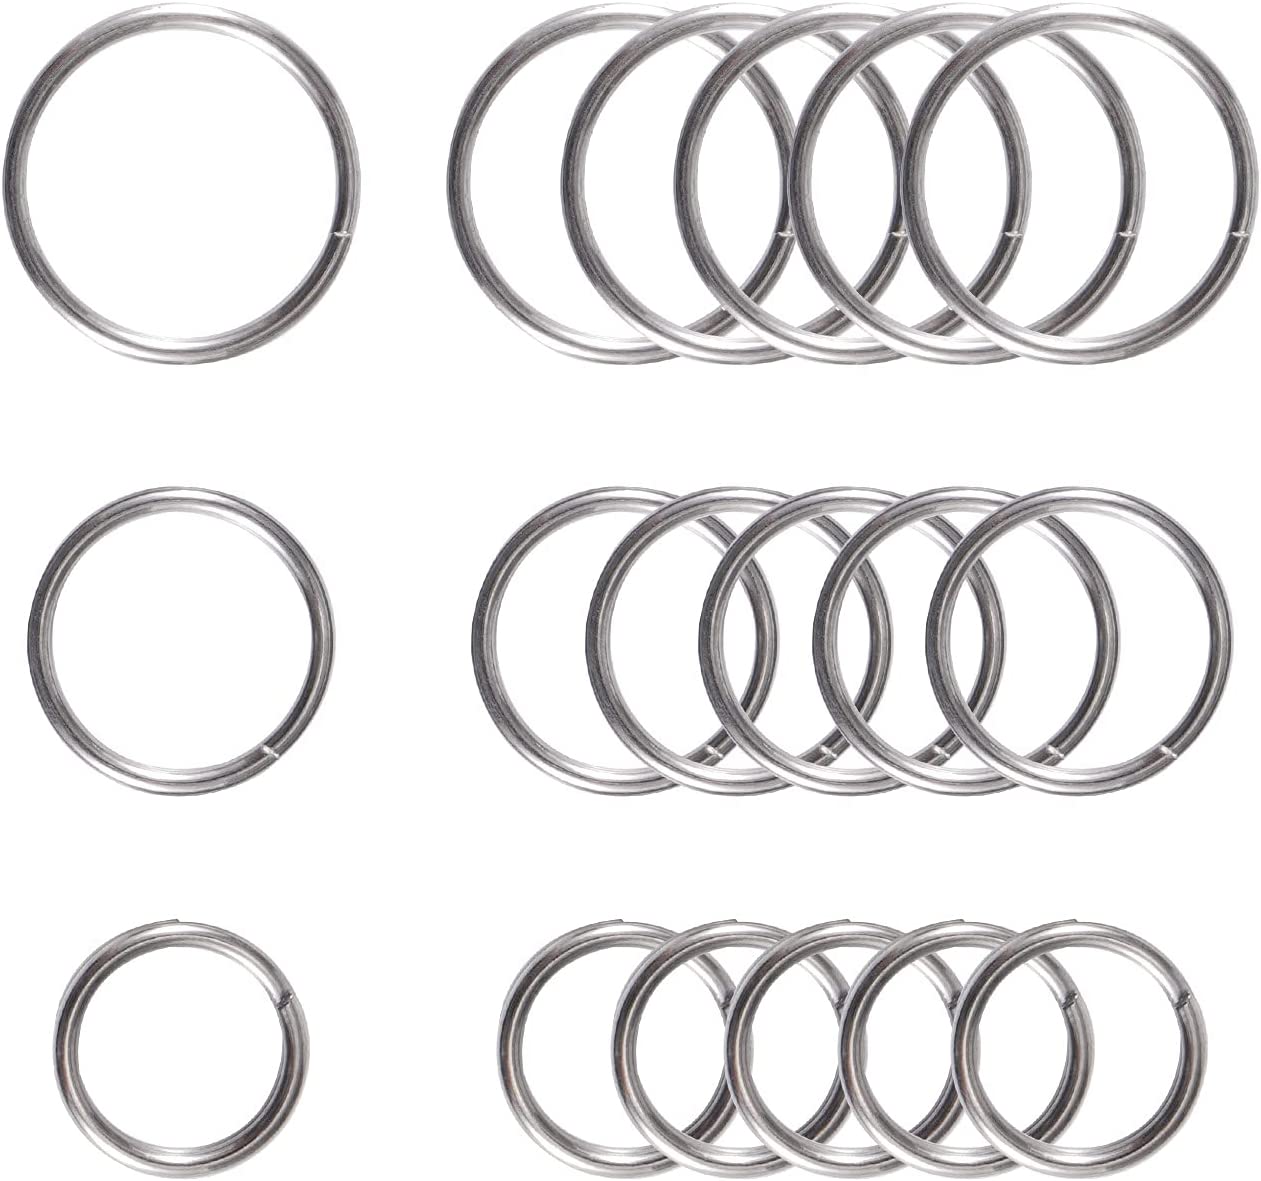 CH8 Titanium Key Rings Split Rings, Titanium Keychain, Non Magnetic Small  Keyrings, Jump Rings for Necklaces - 18psc Flat Ring (Polished)